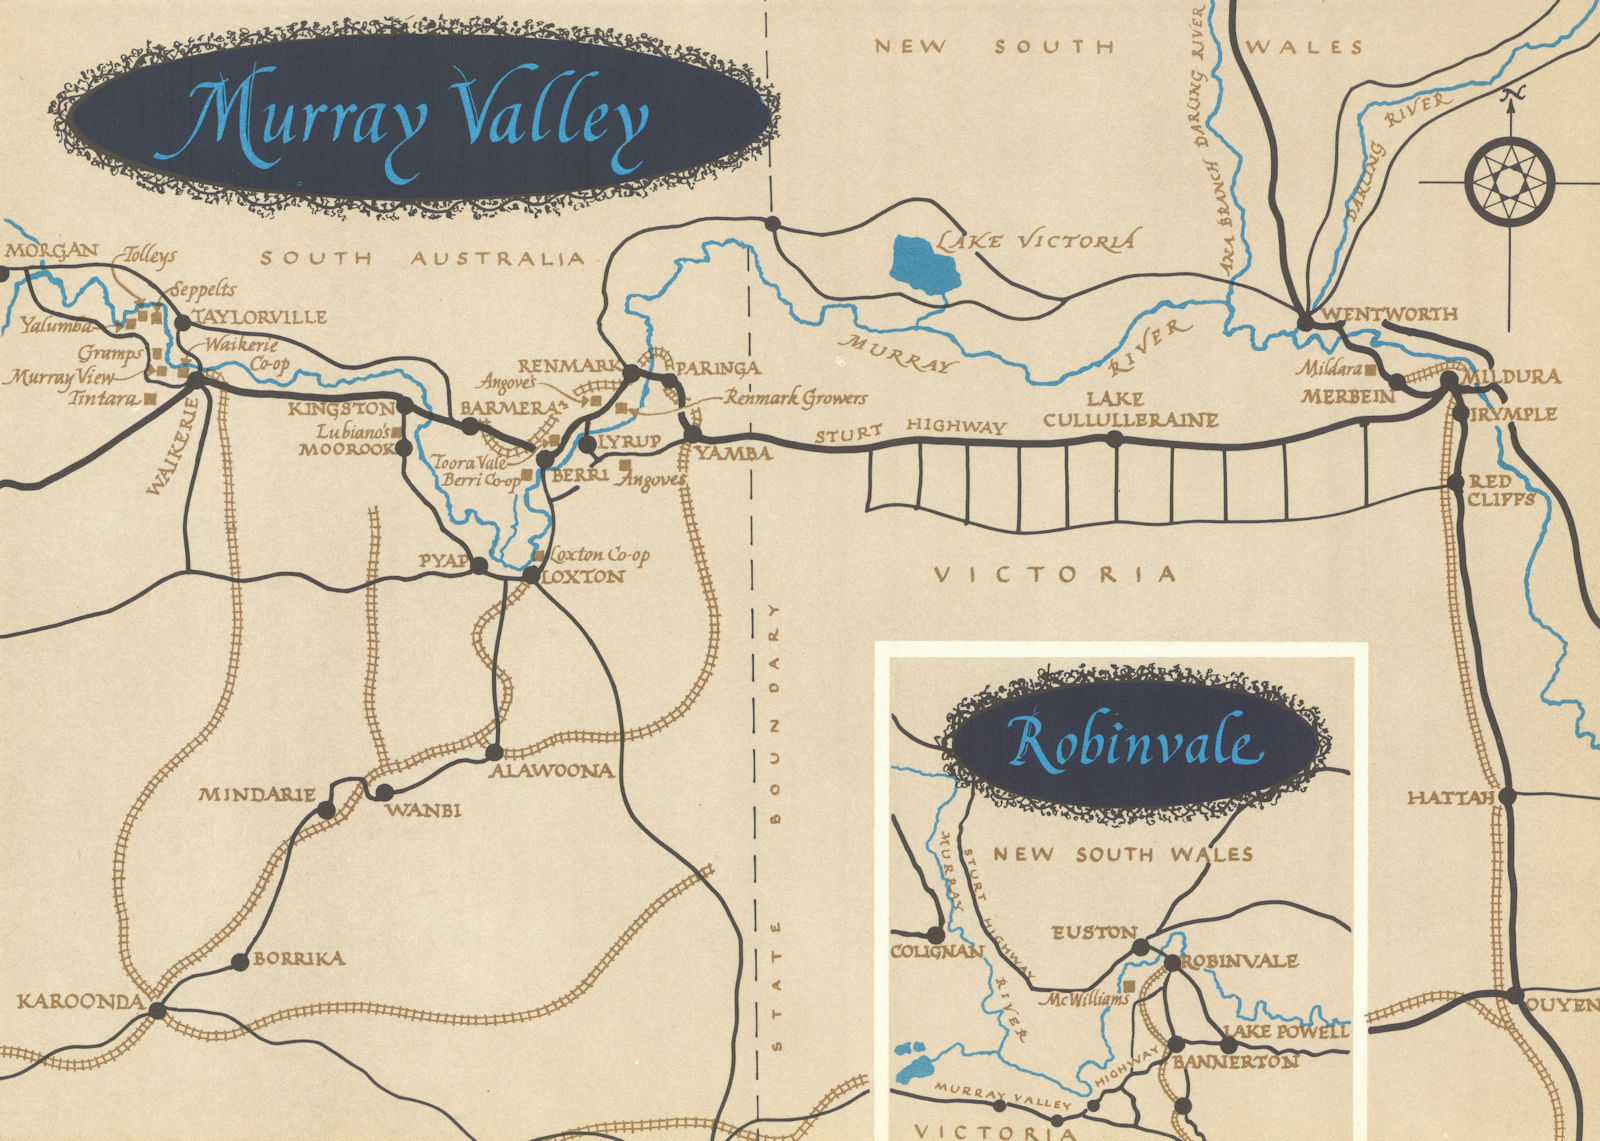 Murray Valley & Robinvale. New South Wales & Victoria wineries 1966 old map